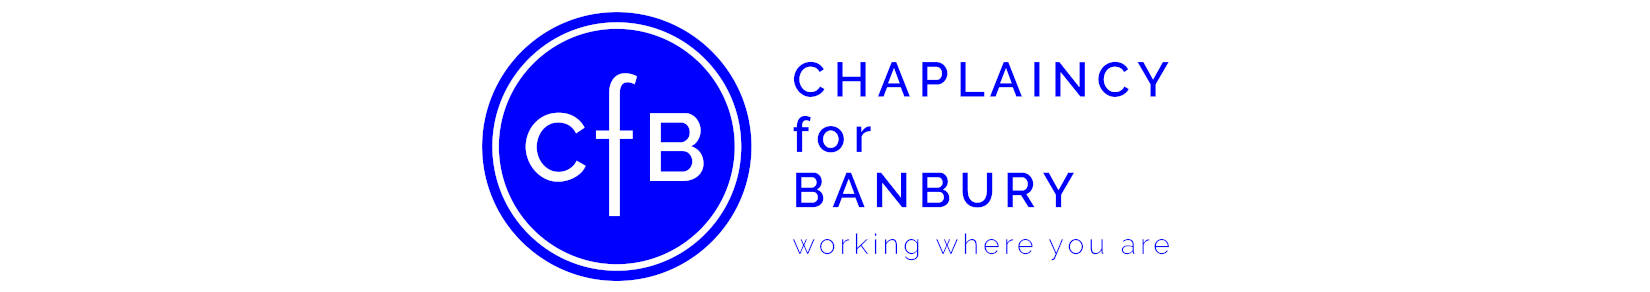 Chaplaincy for Banbury logo tagline working where you are